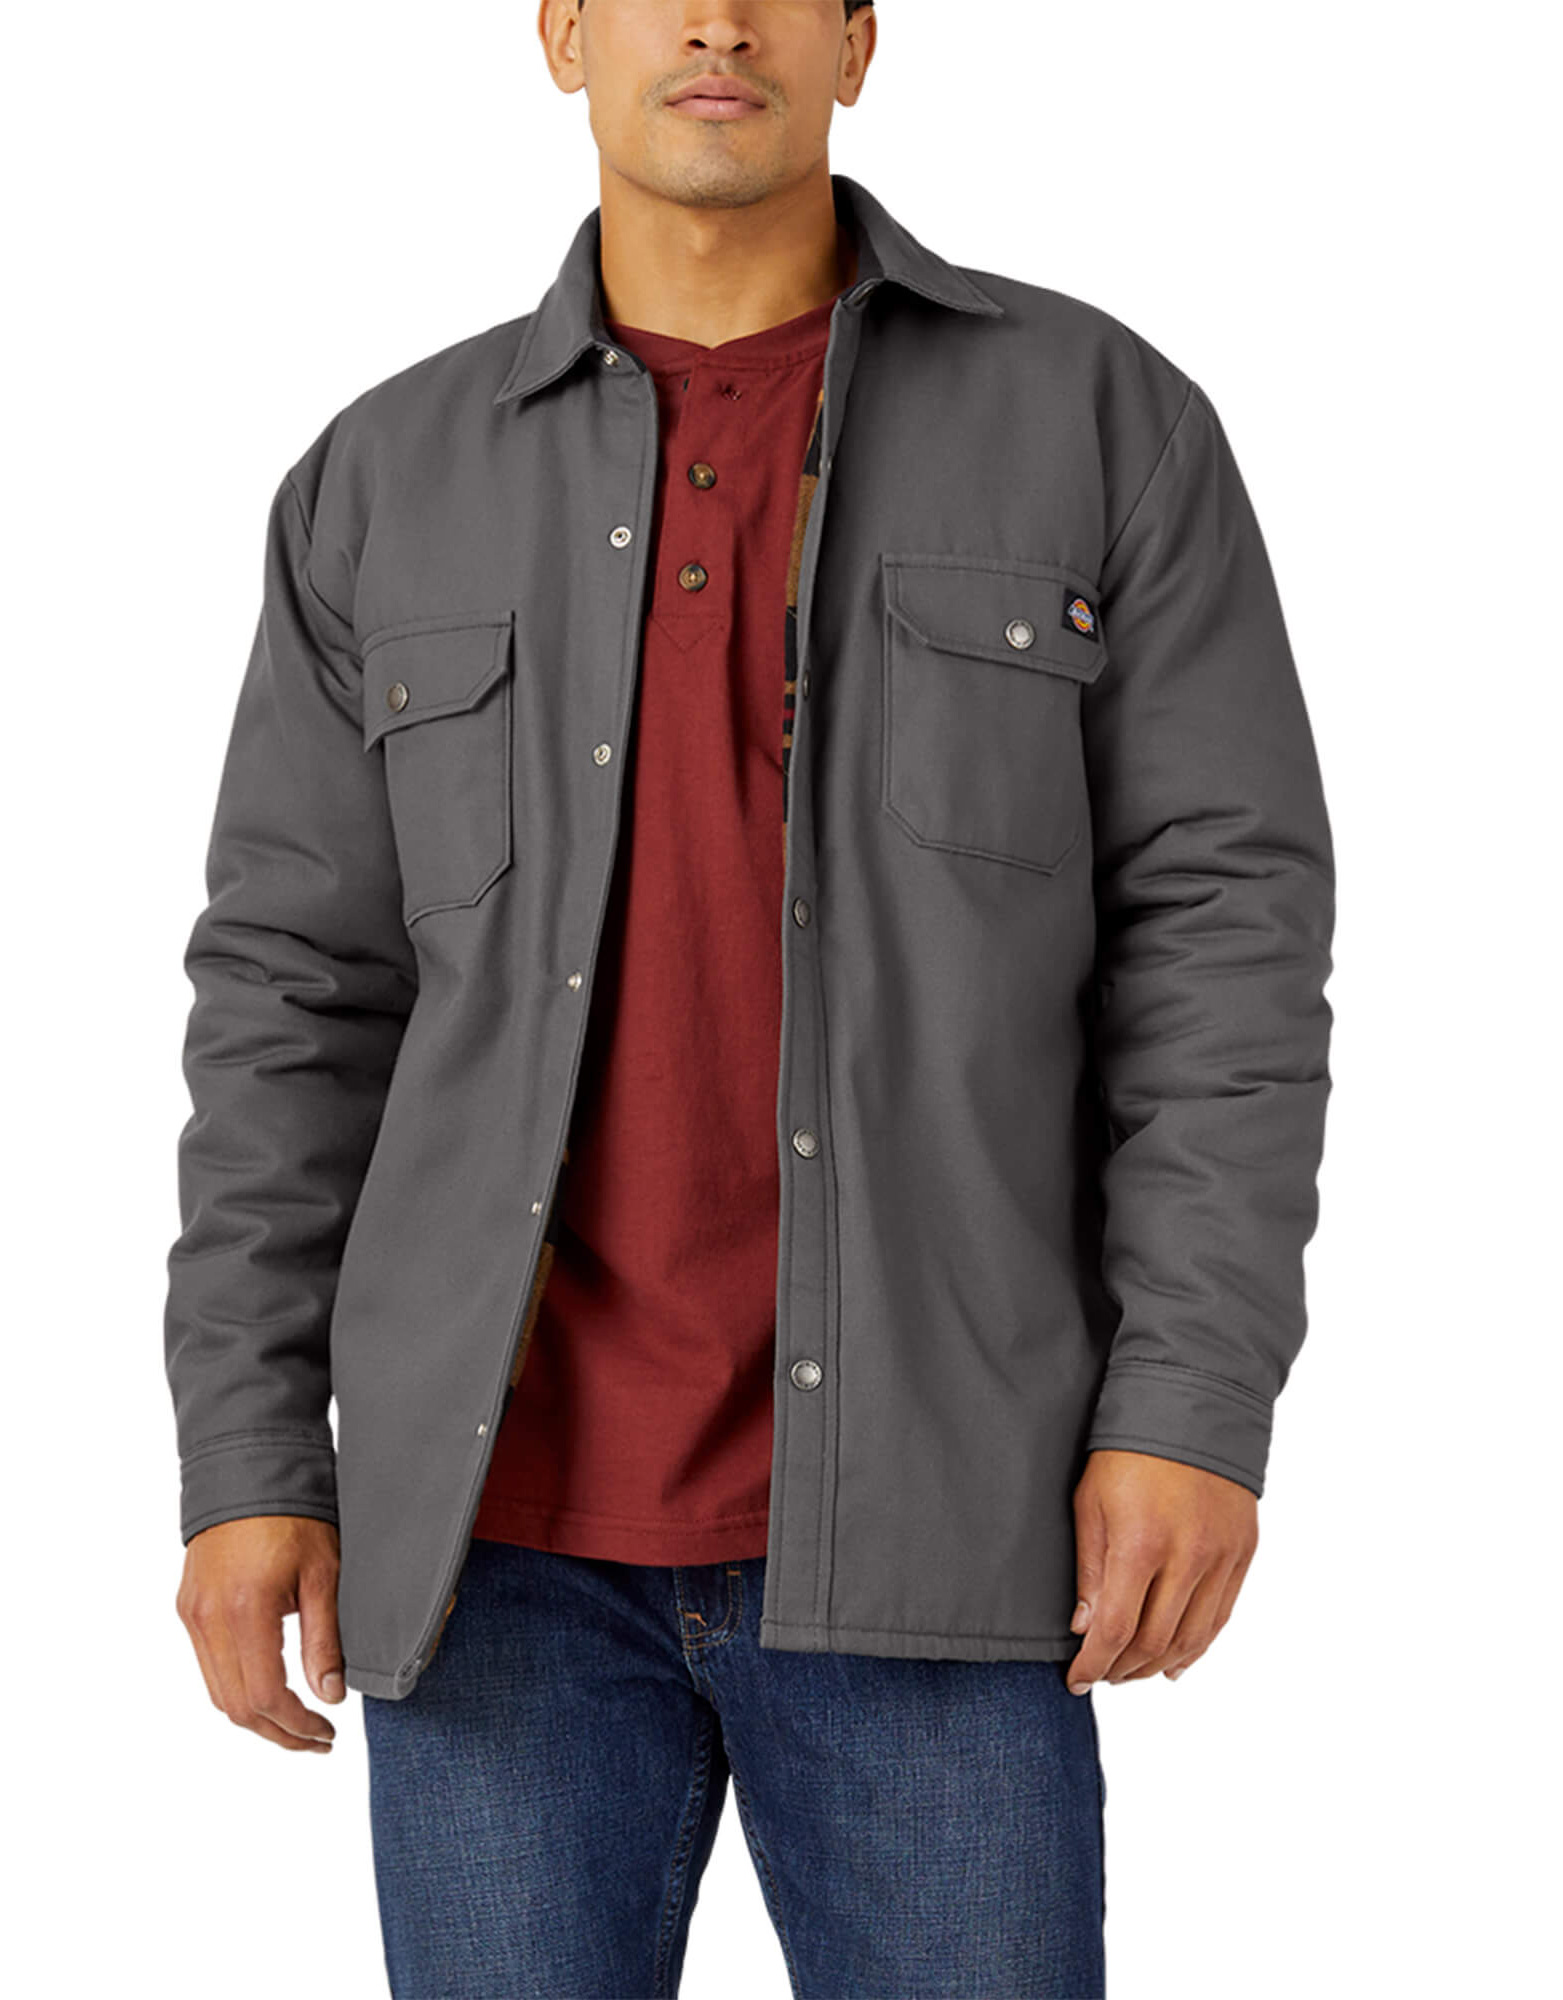 Flannel Lined Duck Shirt Jacket with Hydroshield